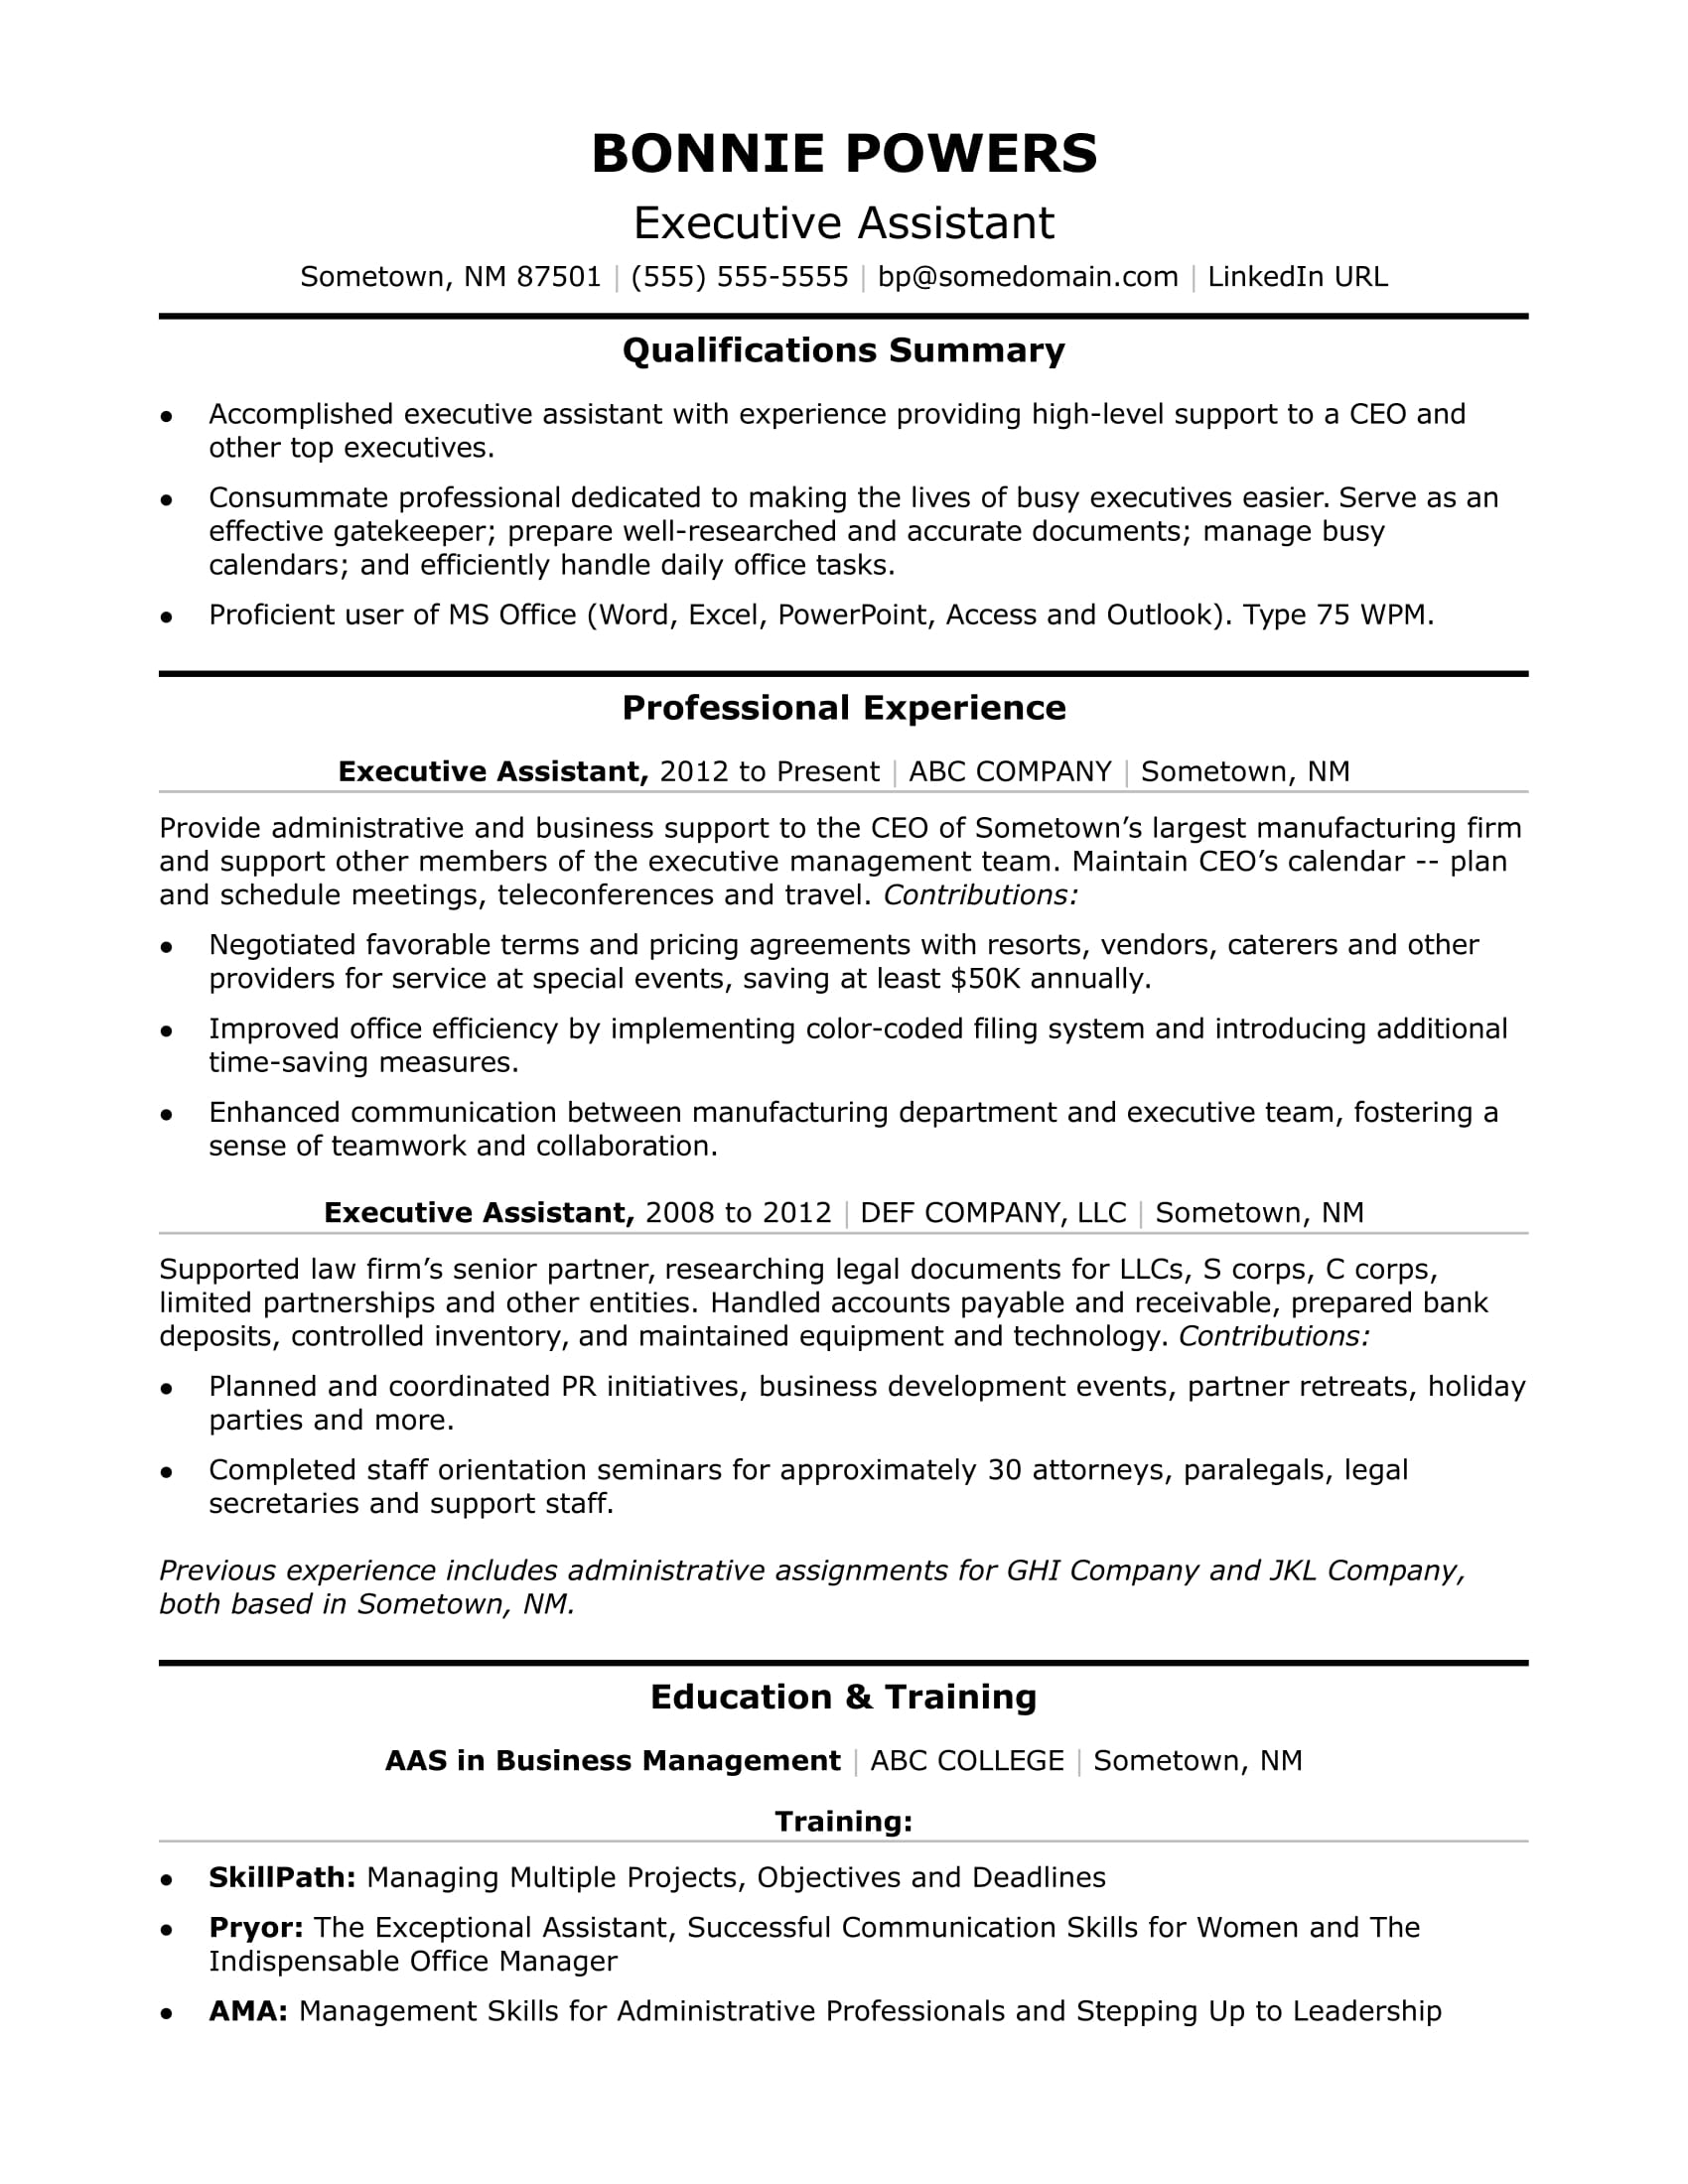 Executive Administrative Assistant Resume Sample  Monster In Executive Assistant Job Description Template